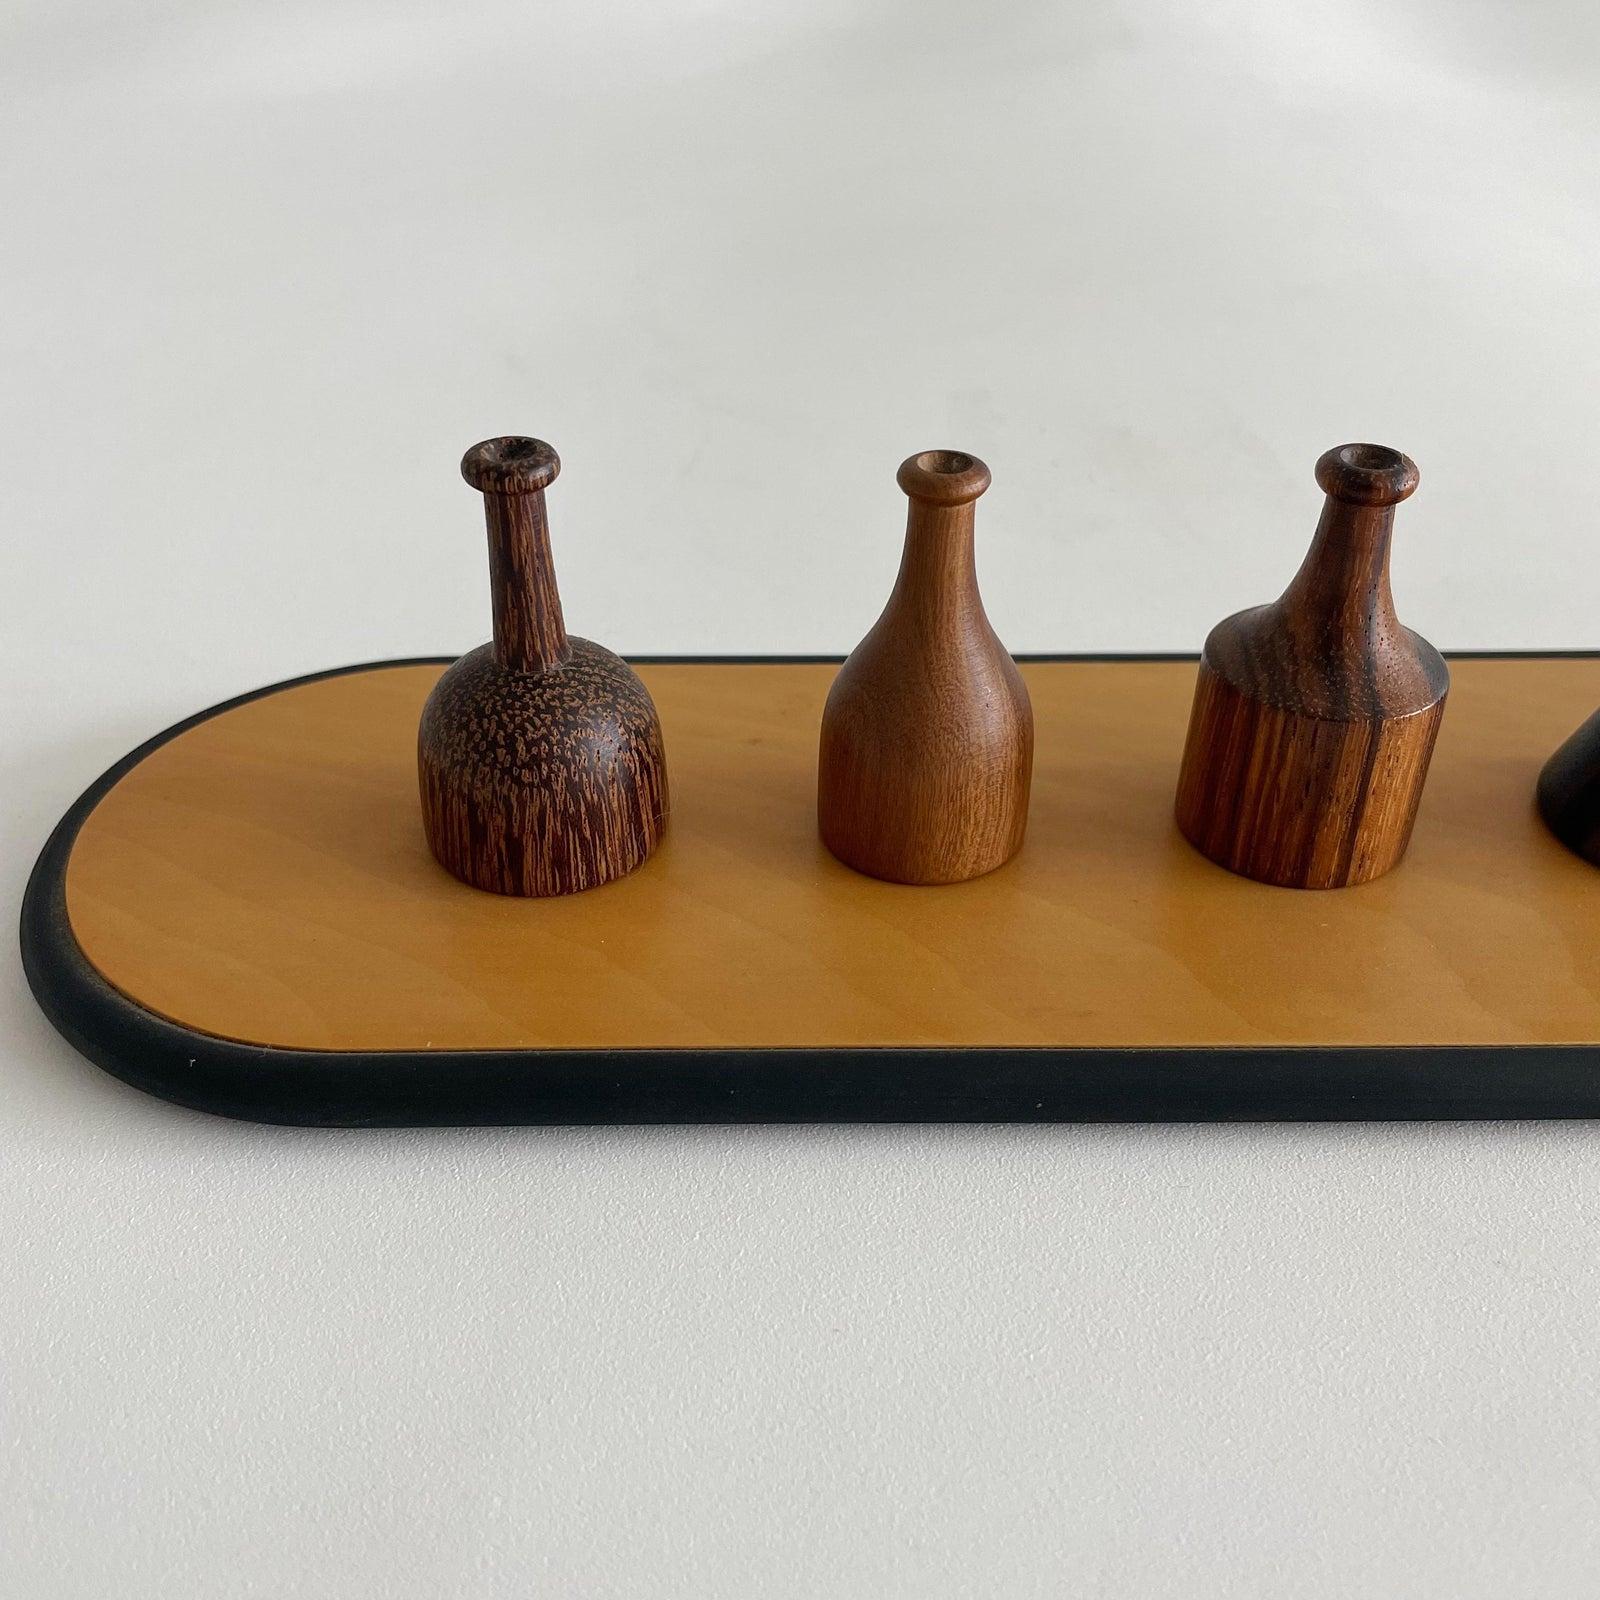 Hand-Carved Giorgio Pizzitutti Exotic Wood Miniature Vases Sculpture Italy 1980's